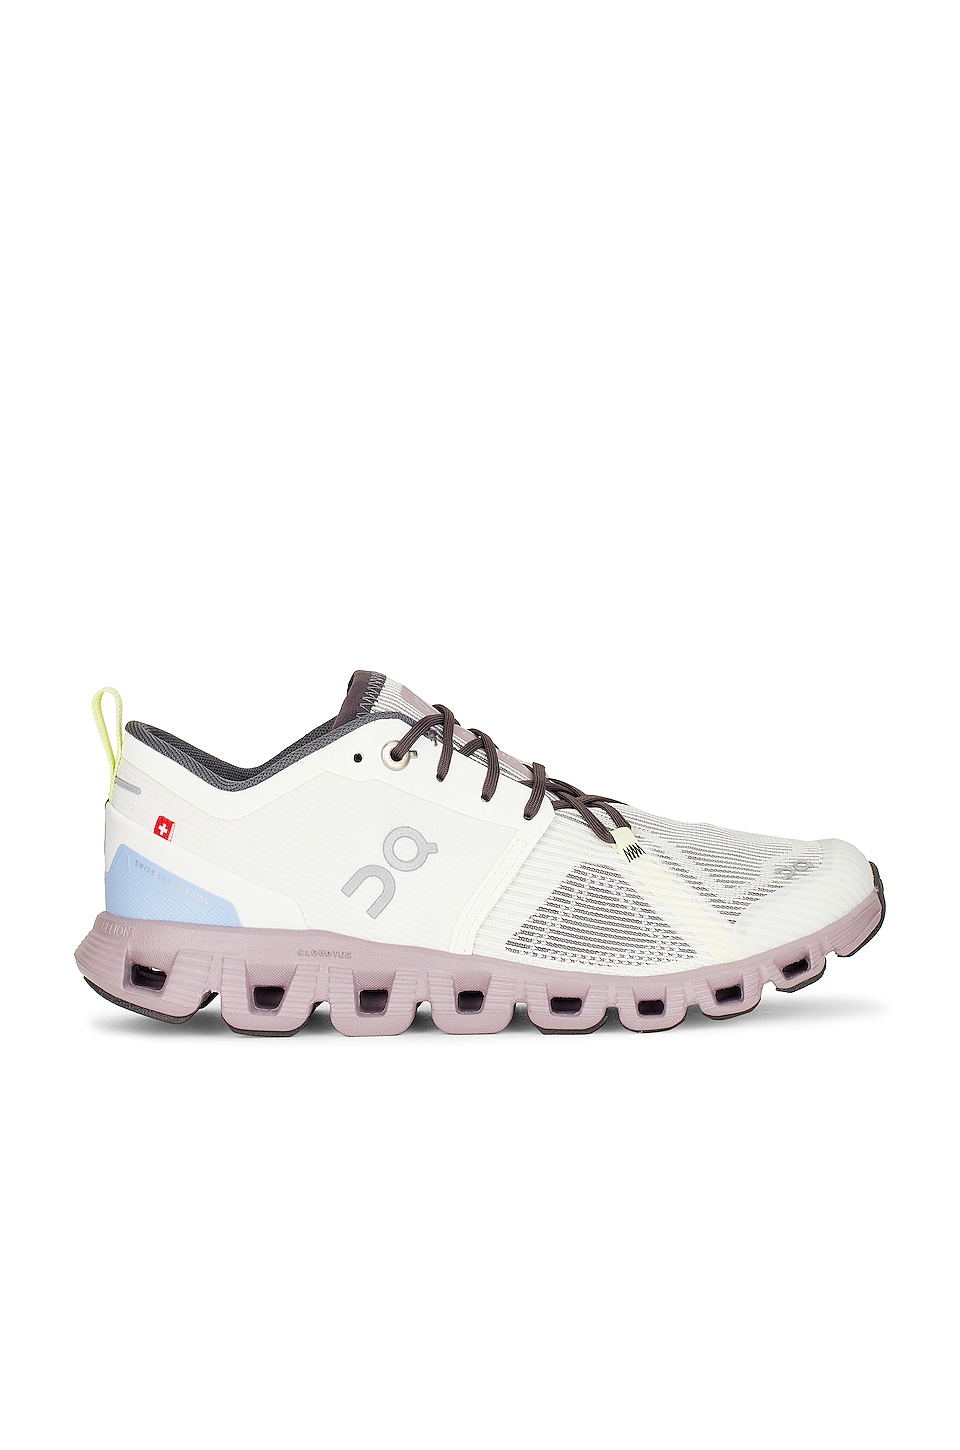 On Cloud x 3 Shift Sneaker in Undyed White & Heron | REVOLVE